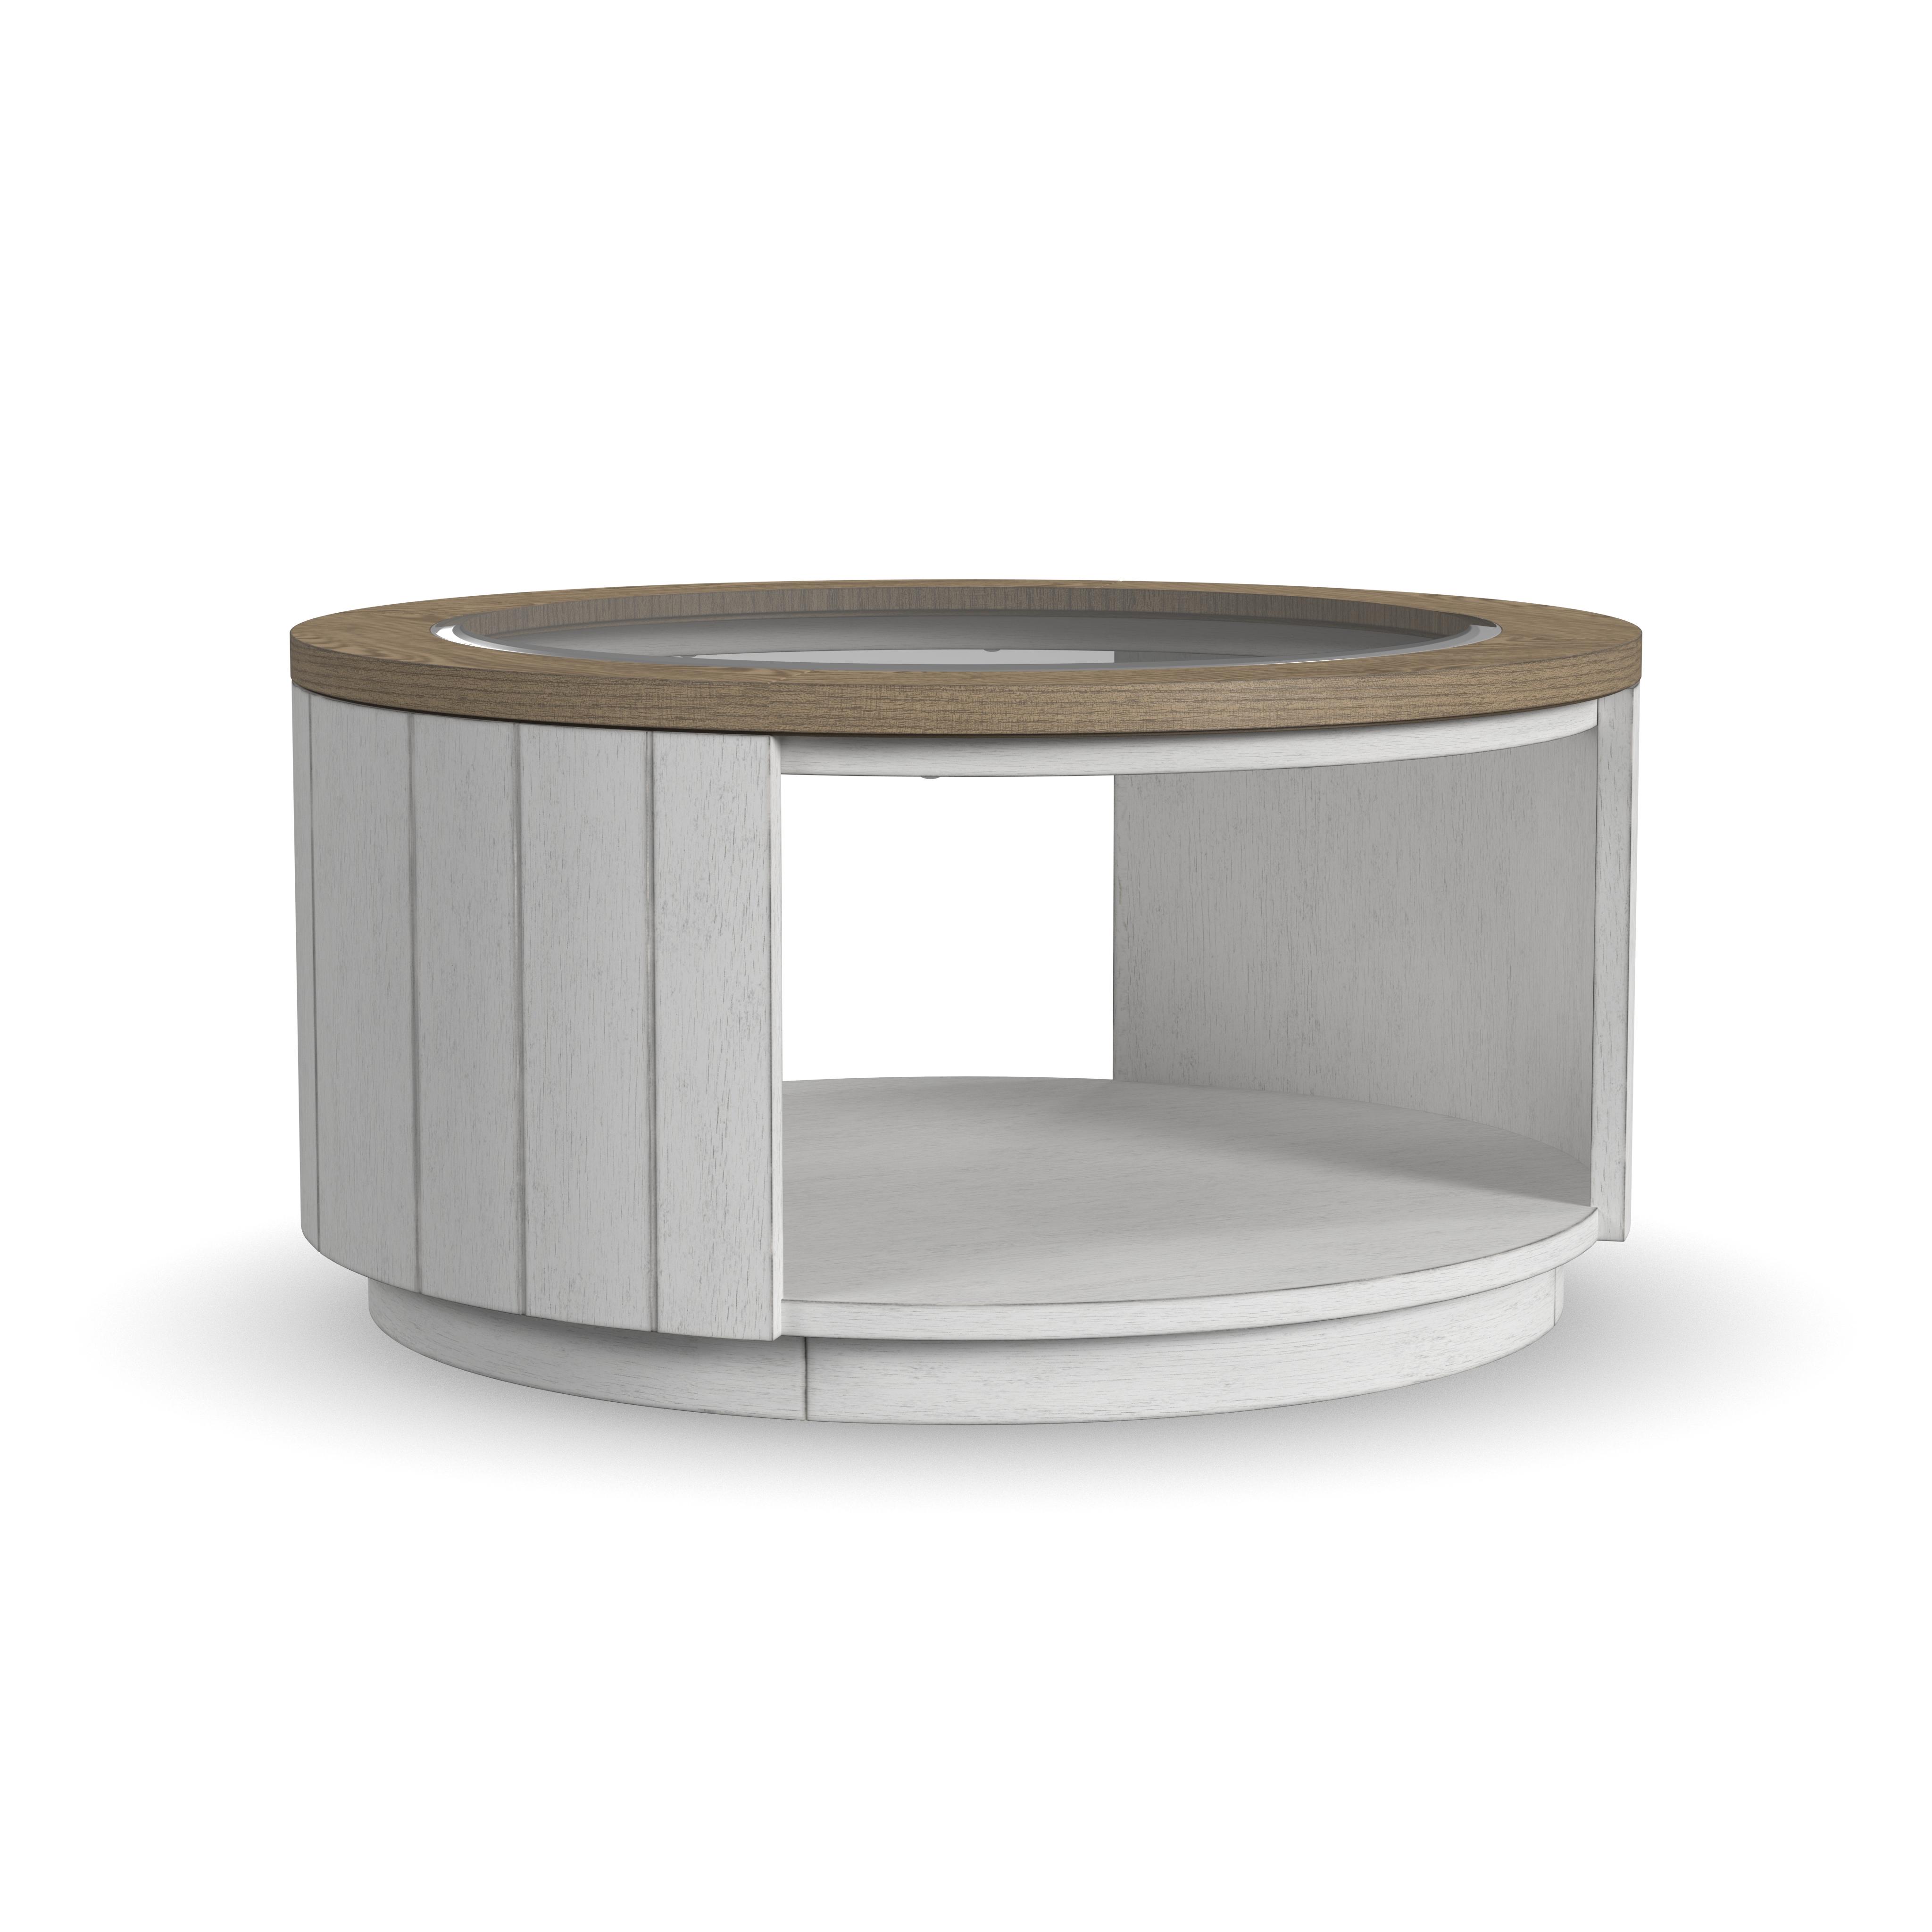 Flexsteel Melody Round Coffee Table with Casters